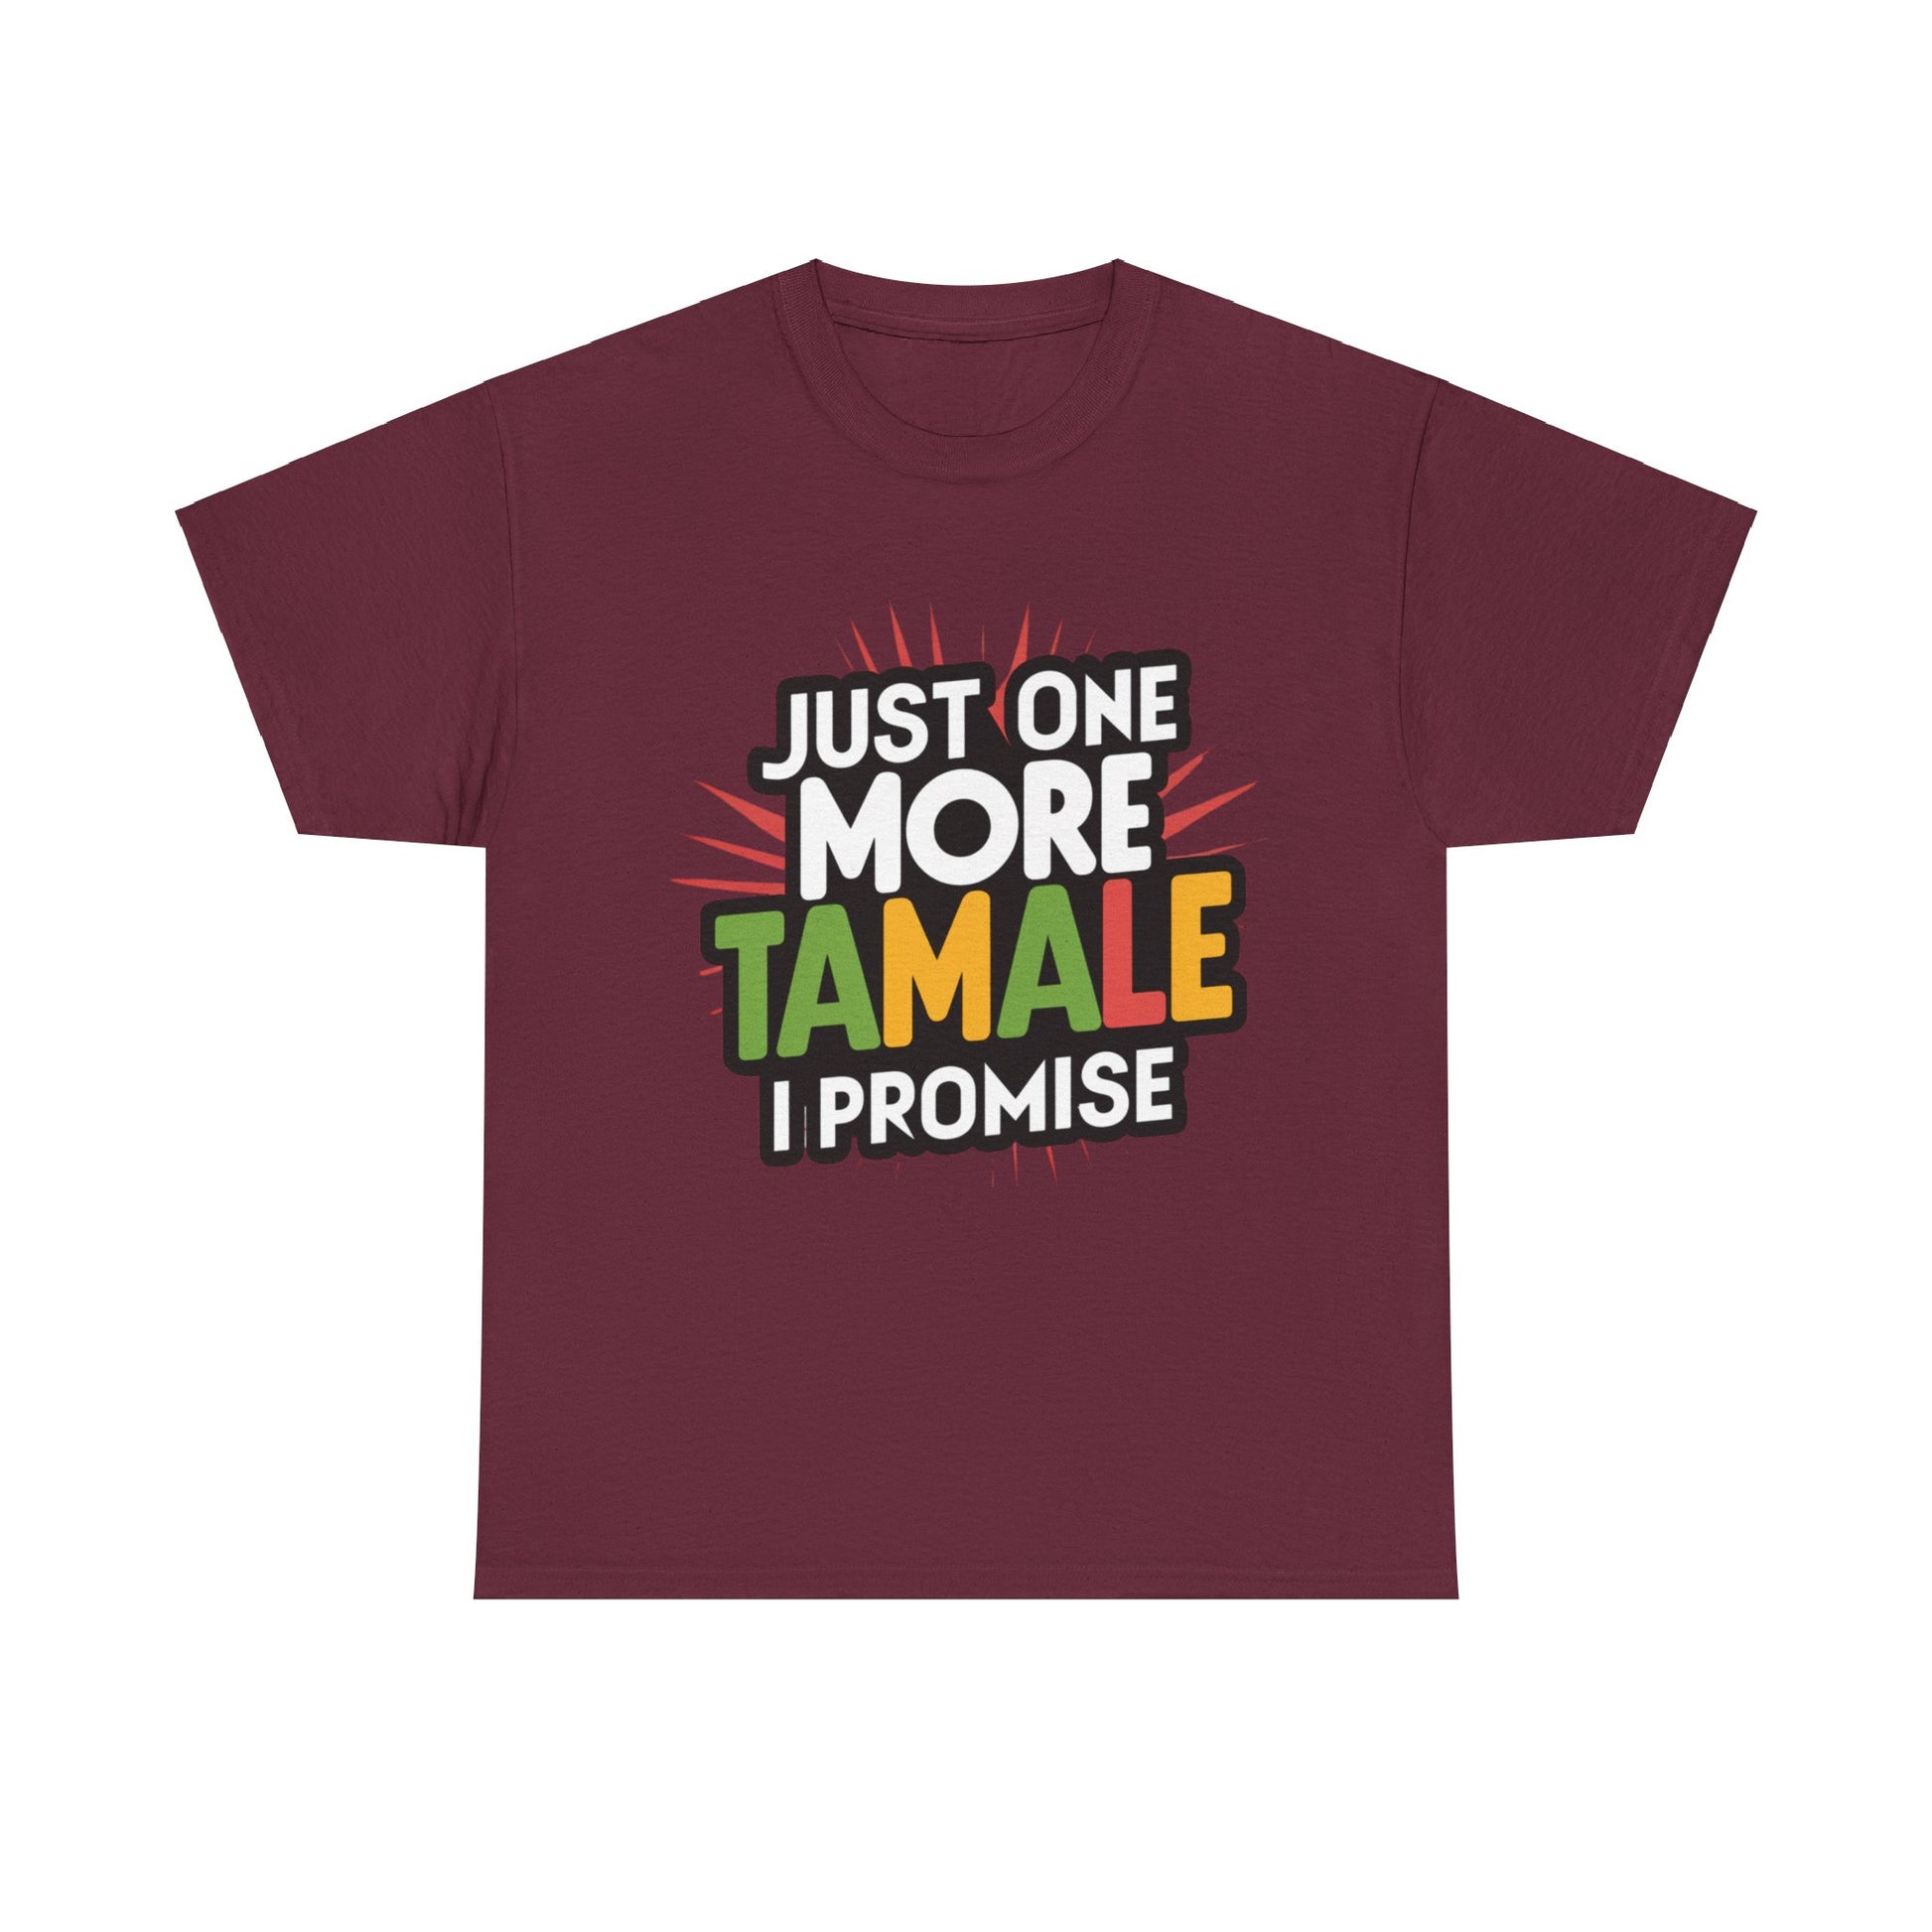 Just One More Tamale I Promise Mexican Food Graphic Unisex Heavy Cotton Tee Cotton Funny Humorous Graphic Soft Premium Unisex Men Women Maroon T-shirt Birthday Gift-5